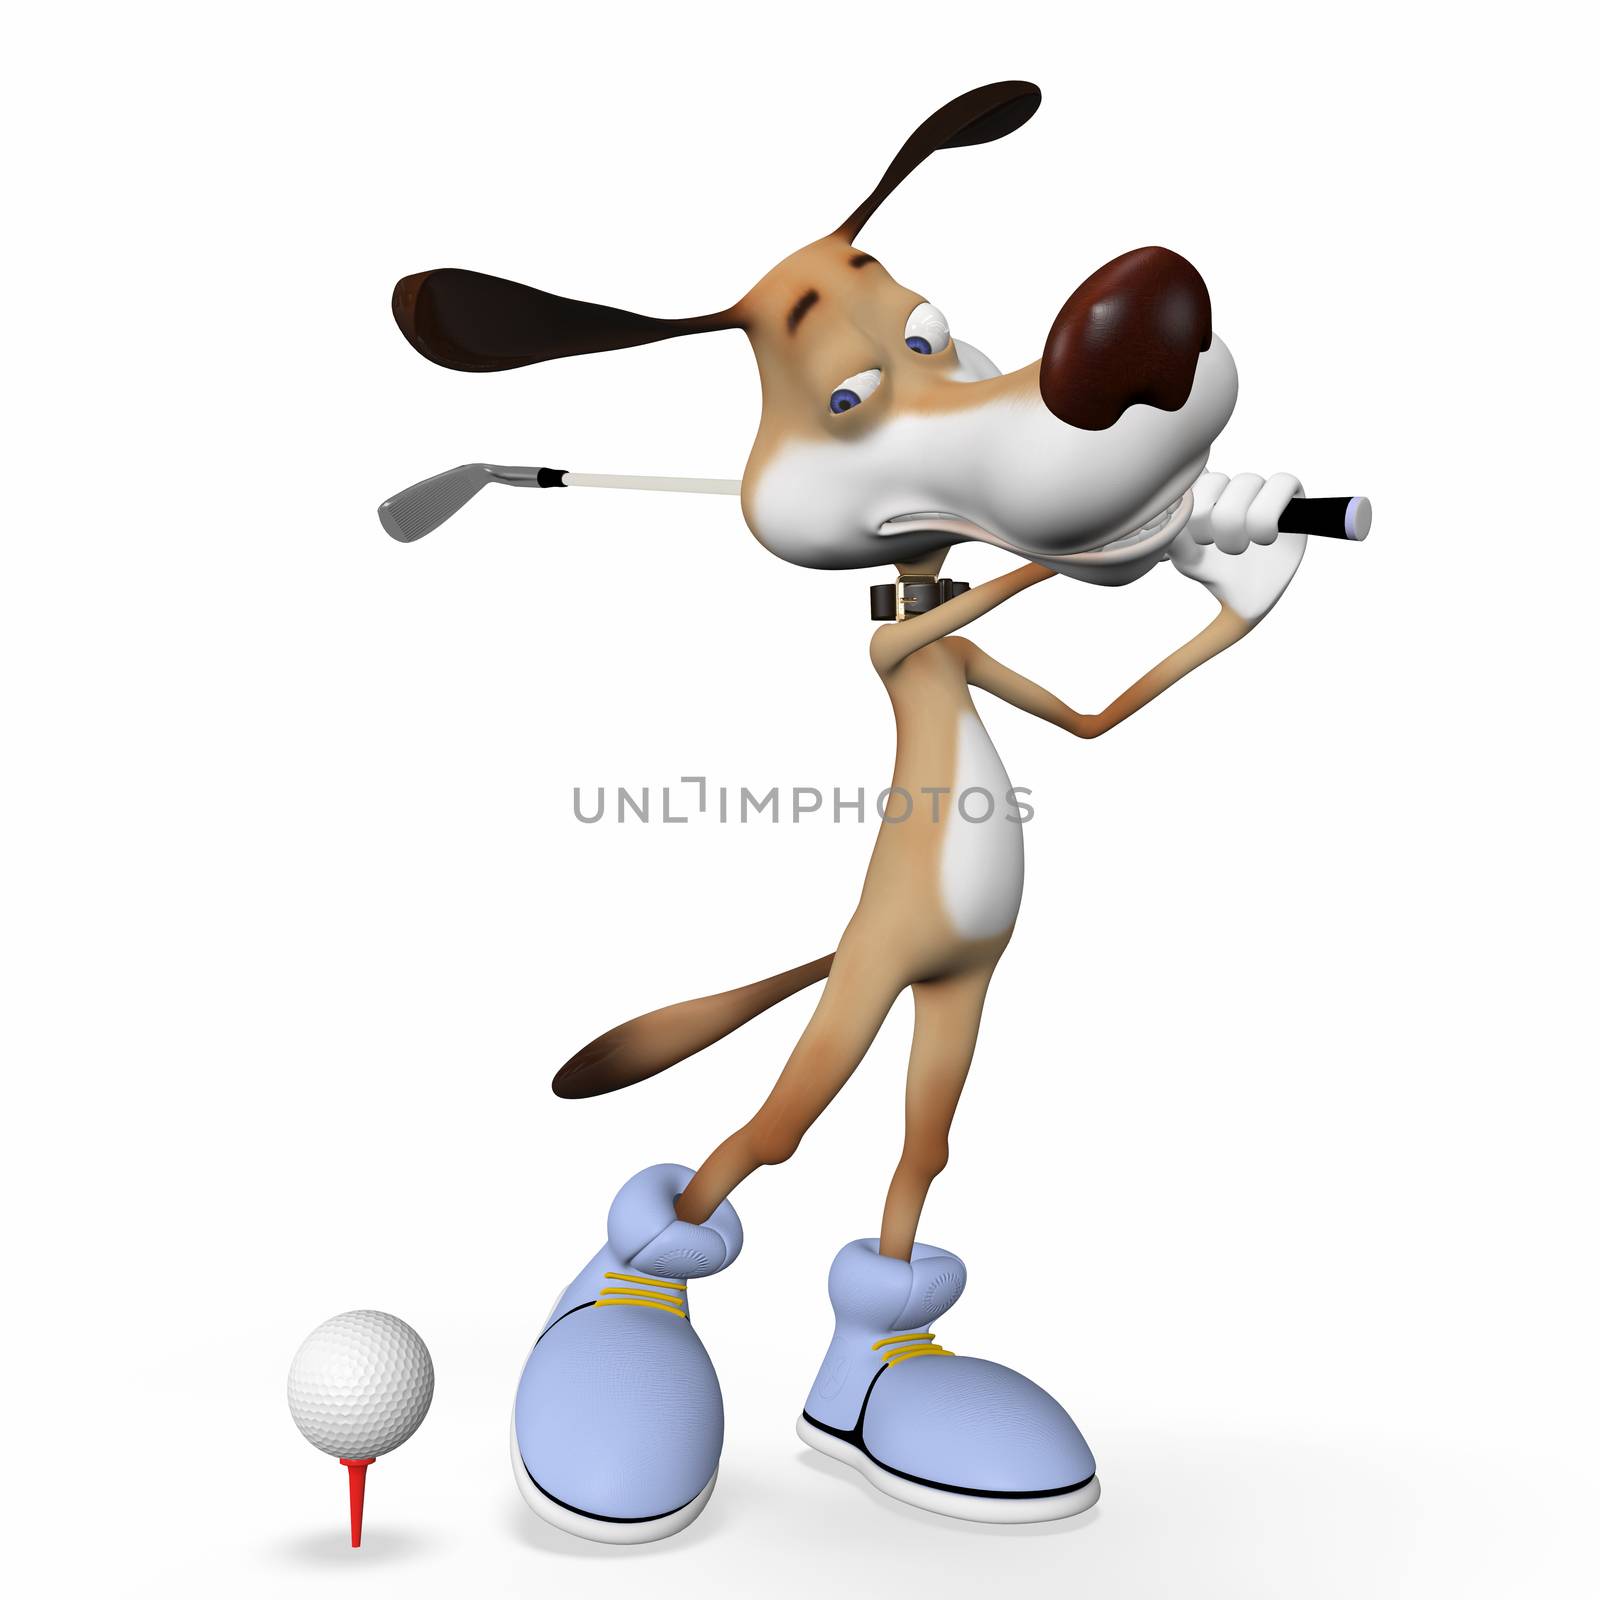 Dog playing golf outdoors in good weather.